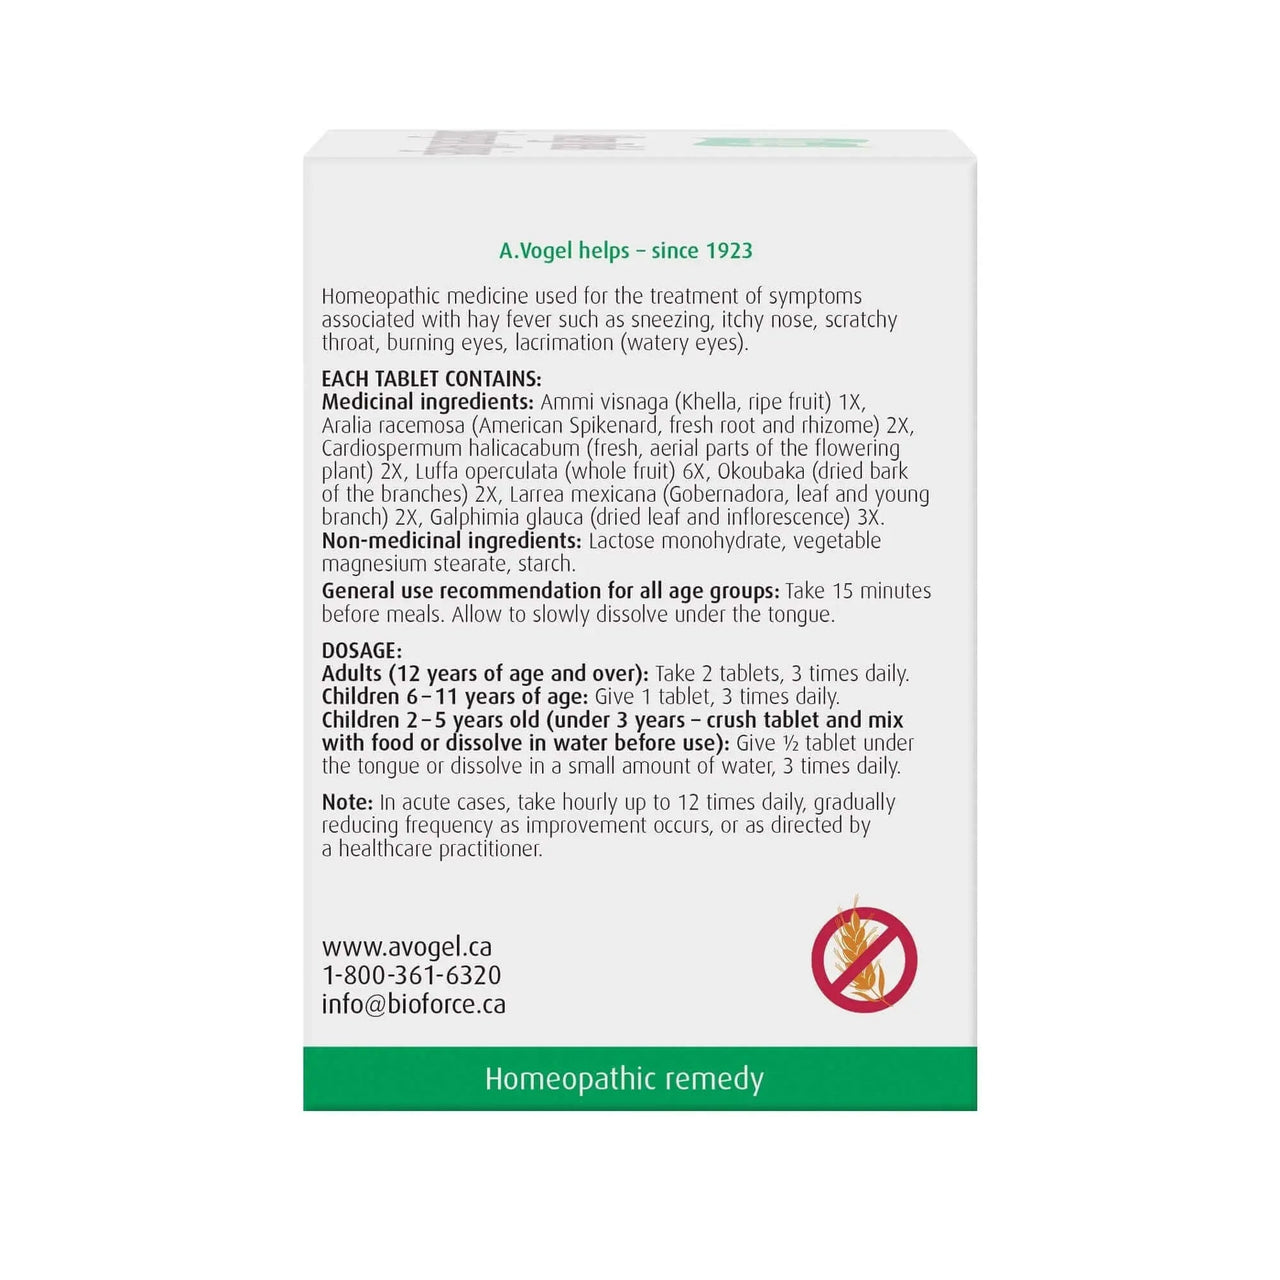 A. Vogel Allergy Relief - Hay Fever Symptoms Non-drowsy 120 Tablets - Nutrition Plus